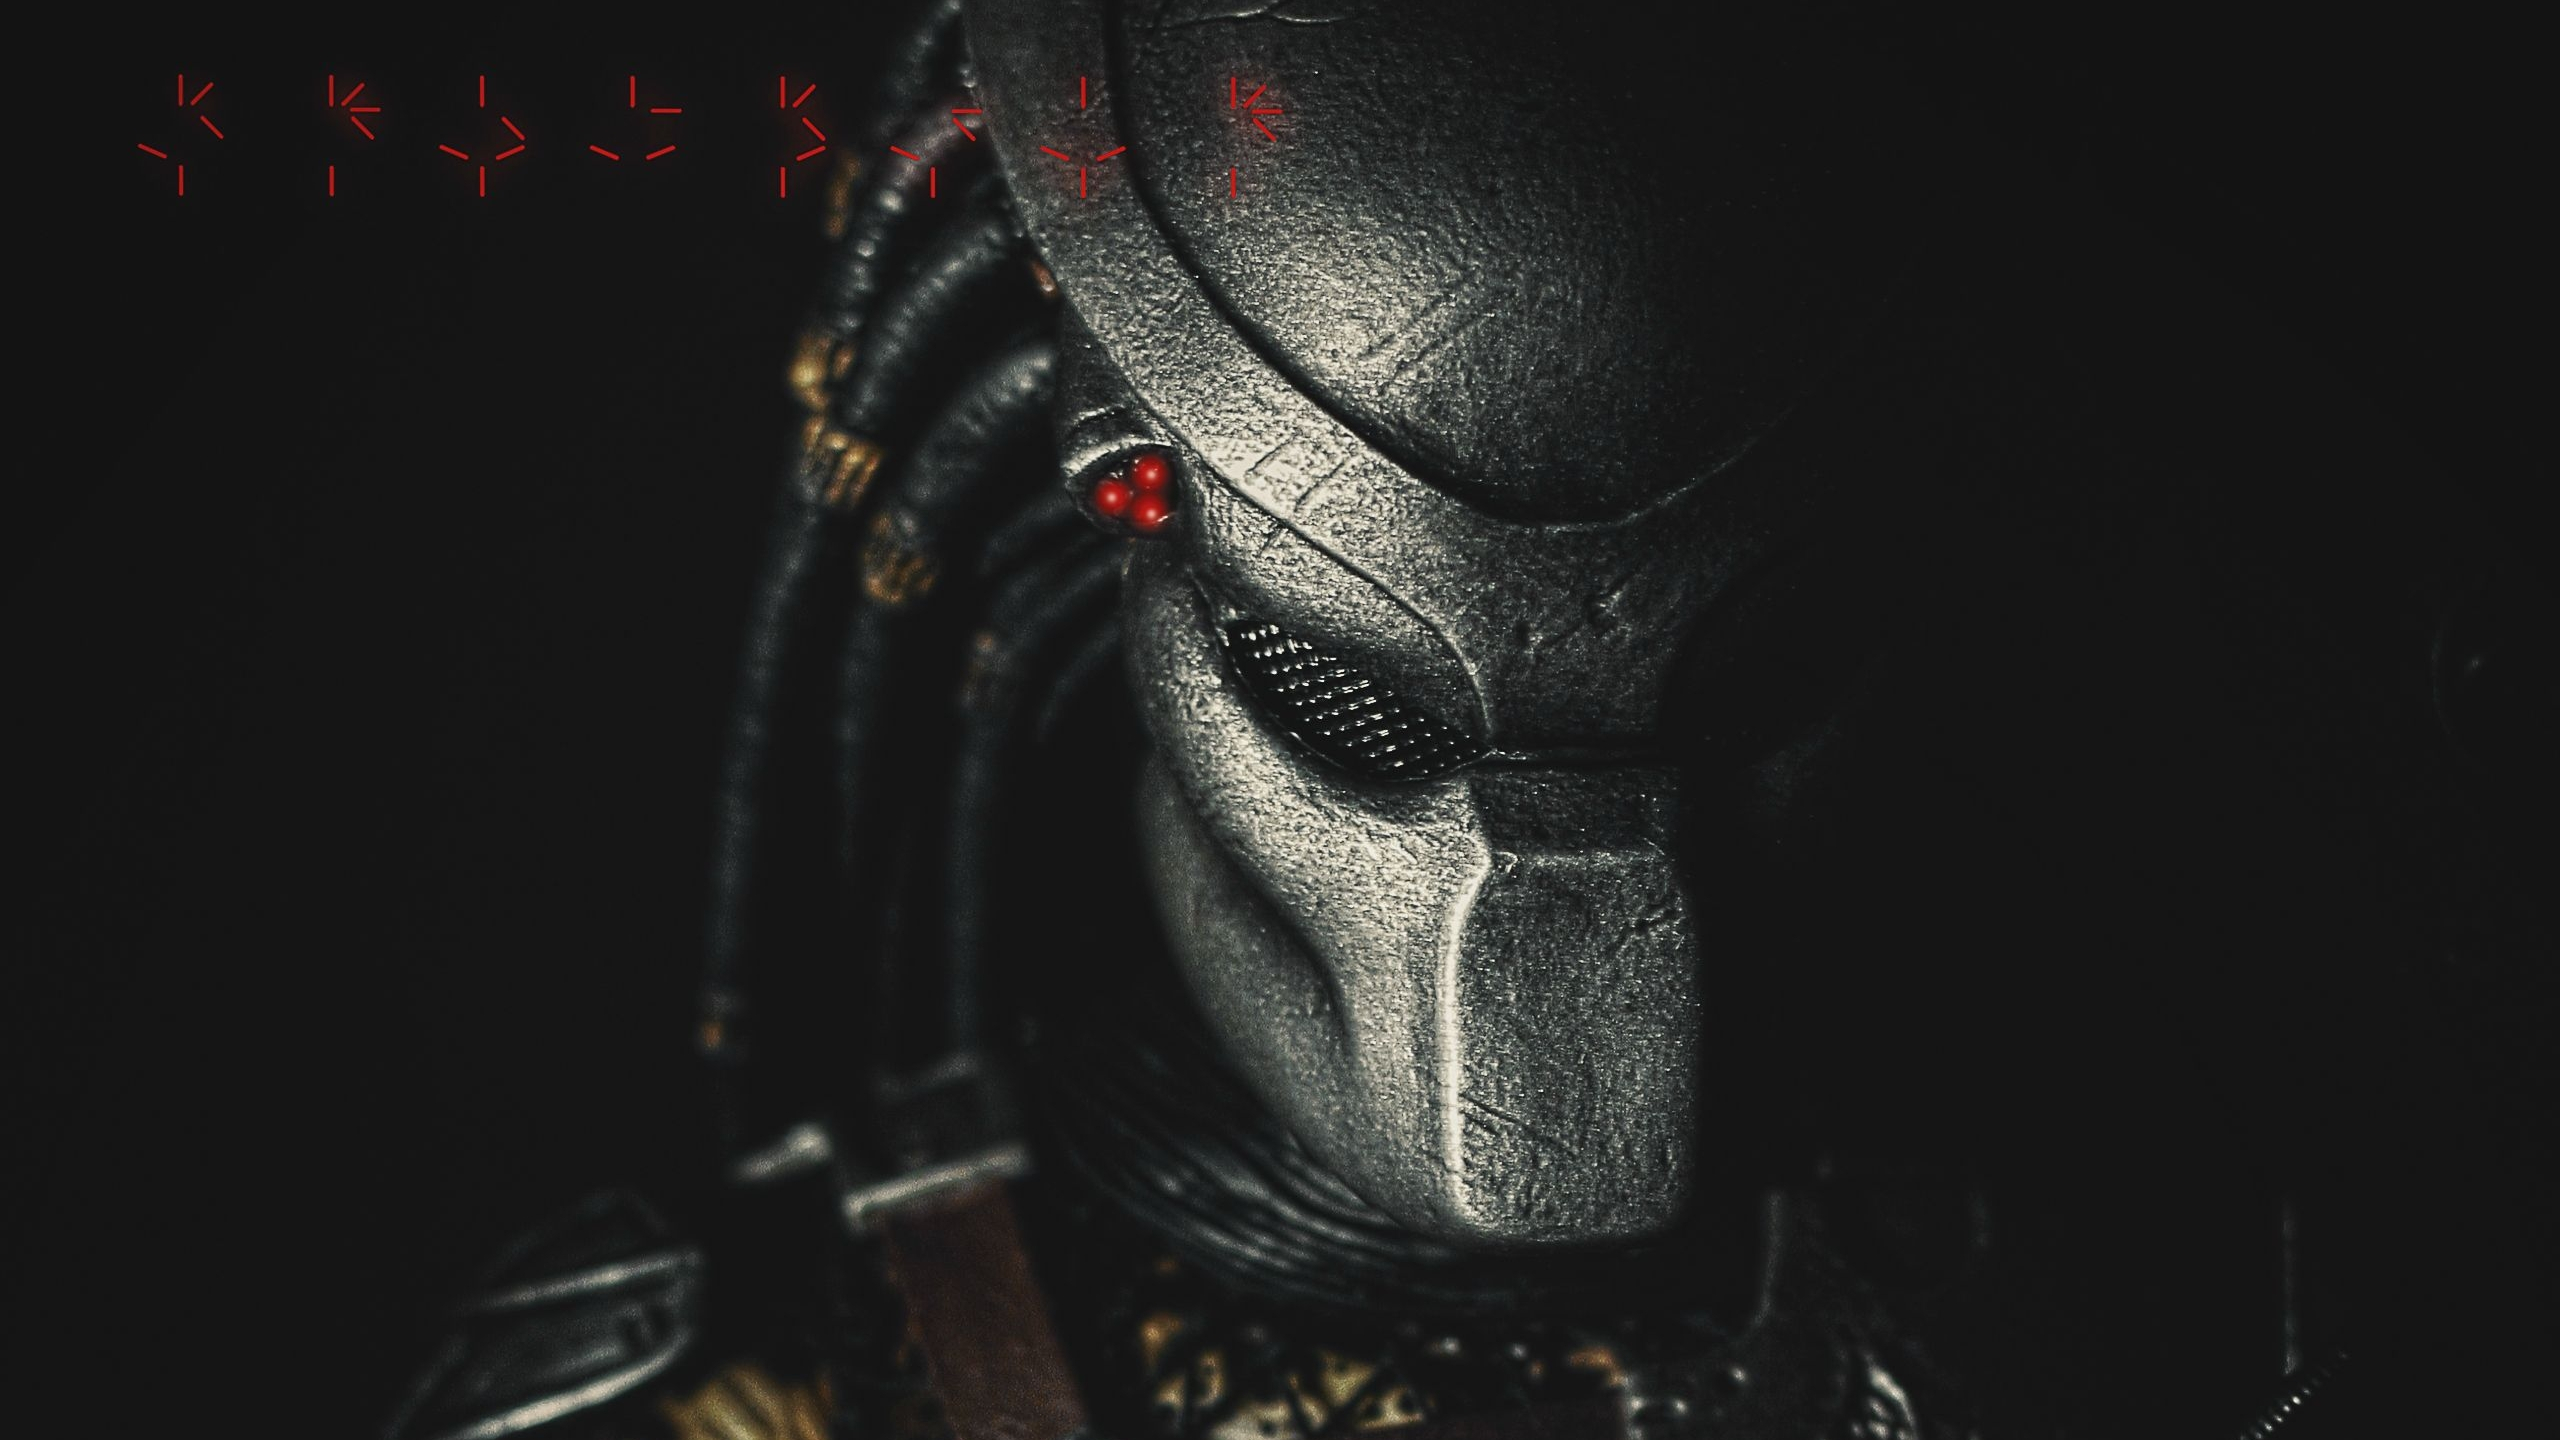 2560x1440 180+ Predator HD Wallpapers and Backgrounds